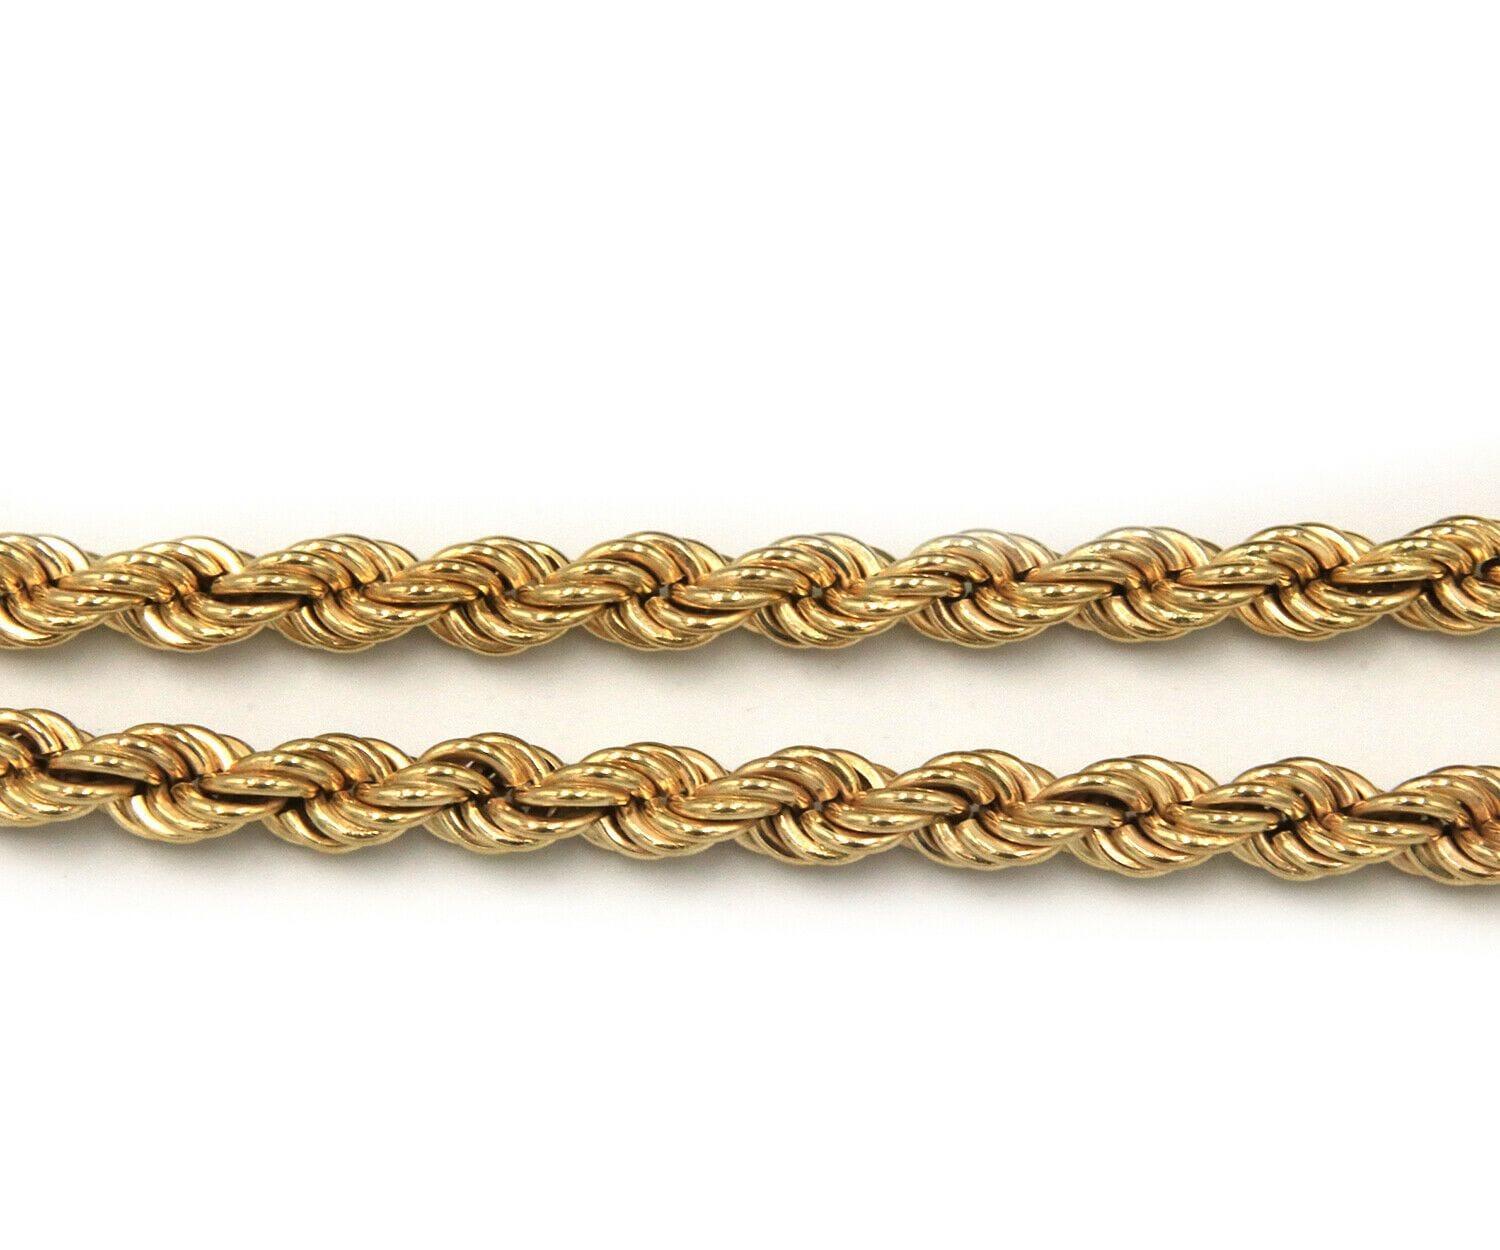 7.0 MM Rope Chain Necklace in 14K

Rope Chain Necklace
14K Yellow Gold
Necklace Width: Approx. 7.0 MM
Necklace Length: Approx. 22.0 Inches
Weight: Approx. 39.30 Grams
Stamped: 14K

Condition:
Offered for your consideration is a previously owned rope